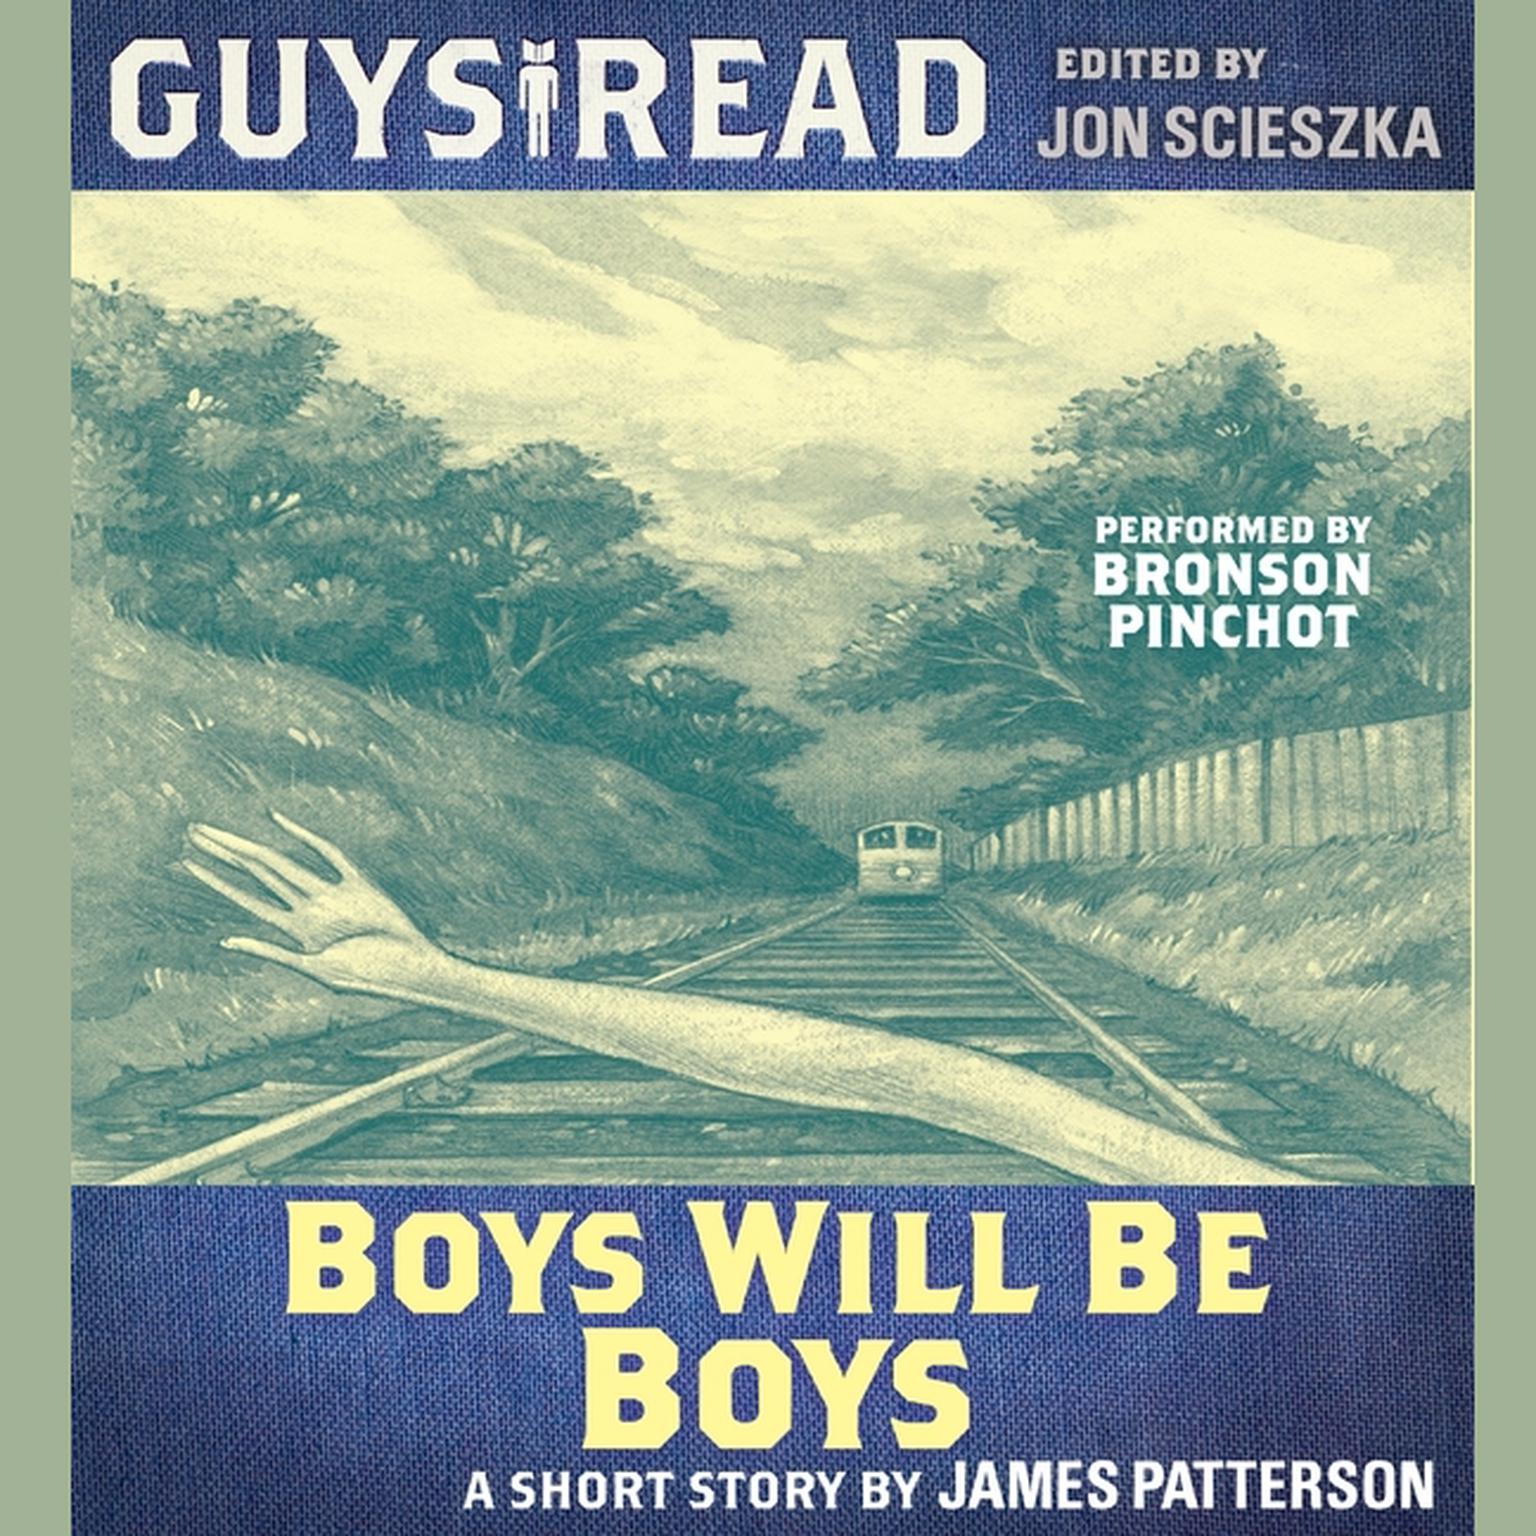 Guys Read: Boys Will Be Boys Audiobook, by James Patterson